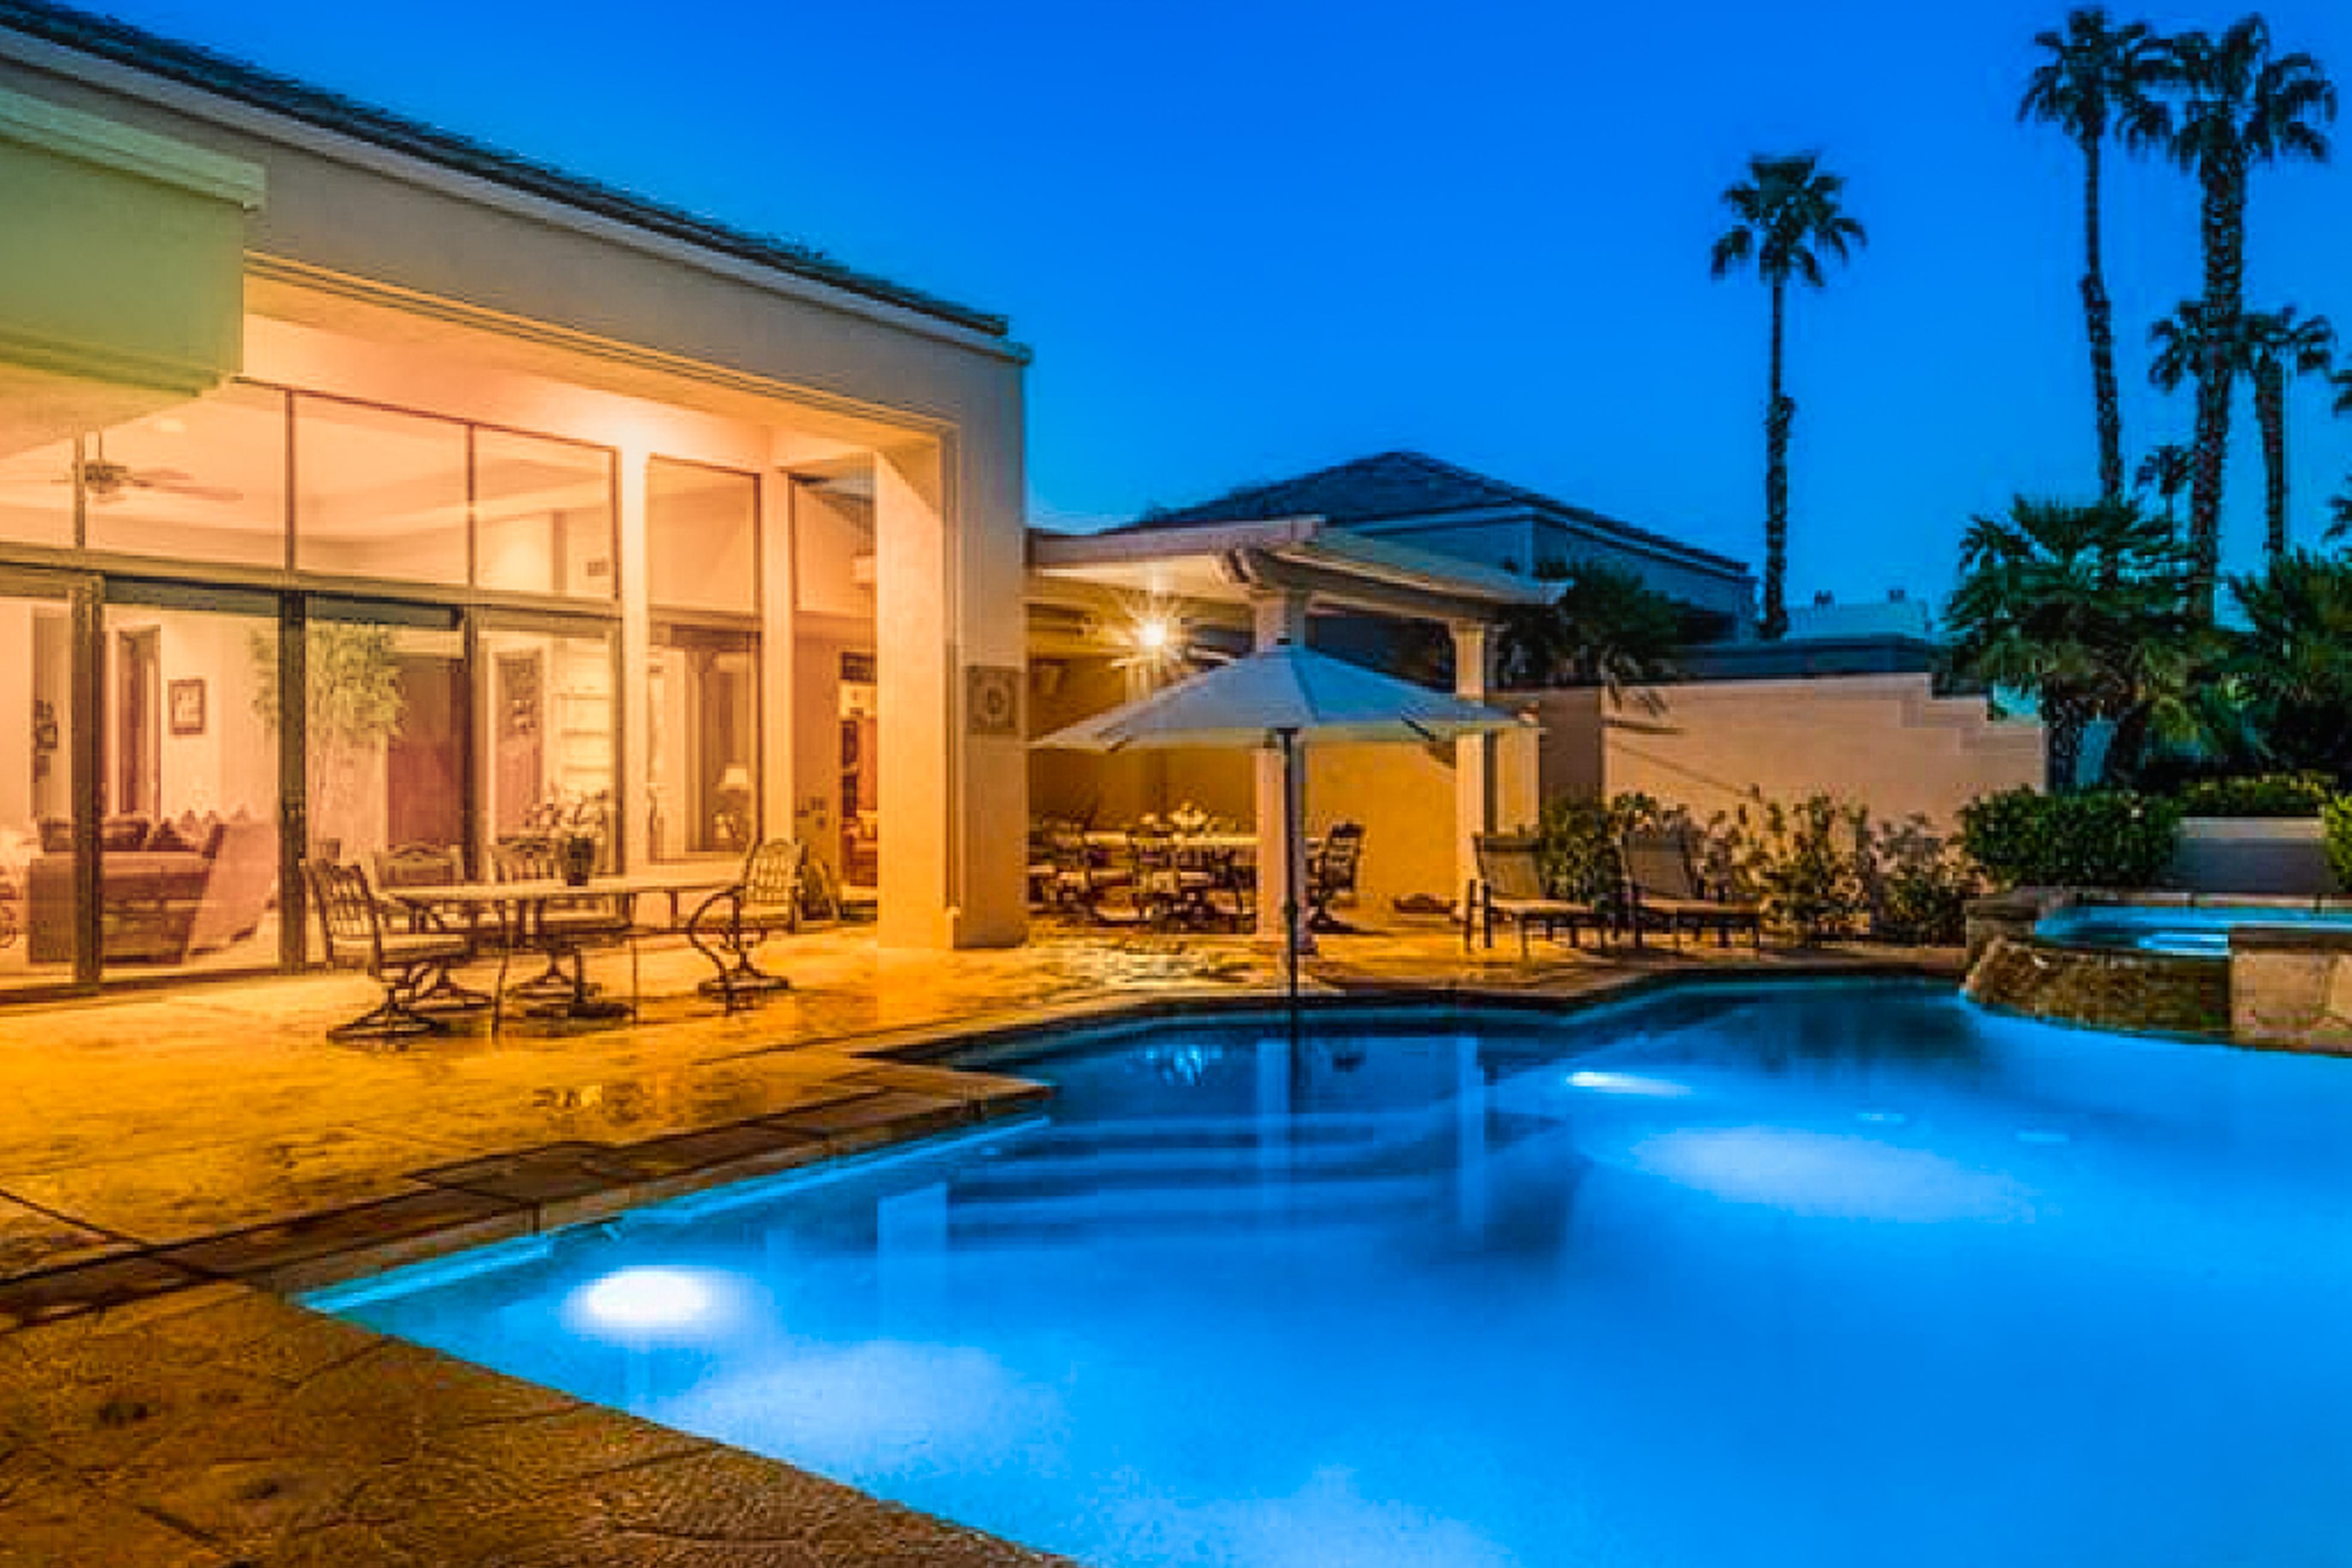 Escape to Luxury at PGA West